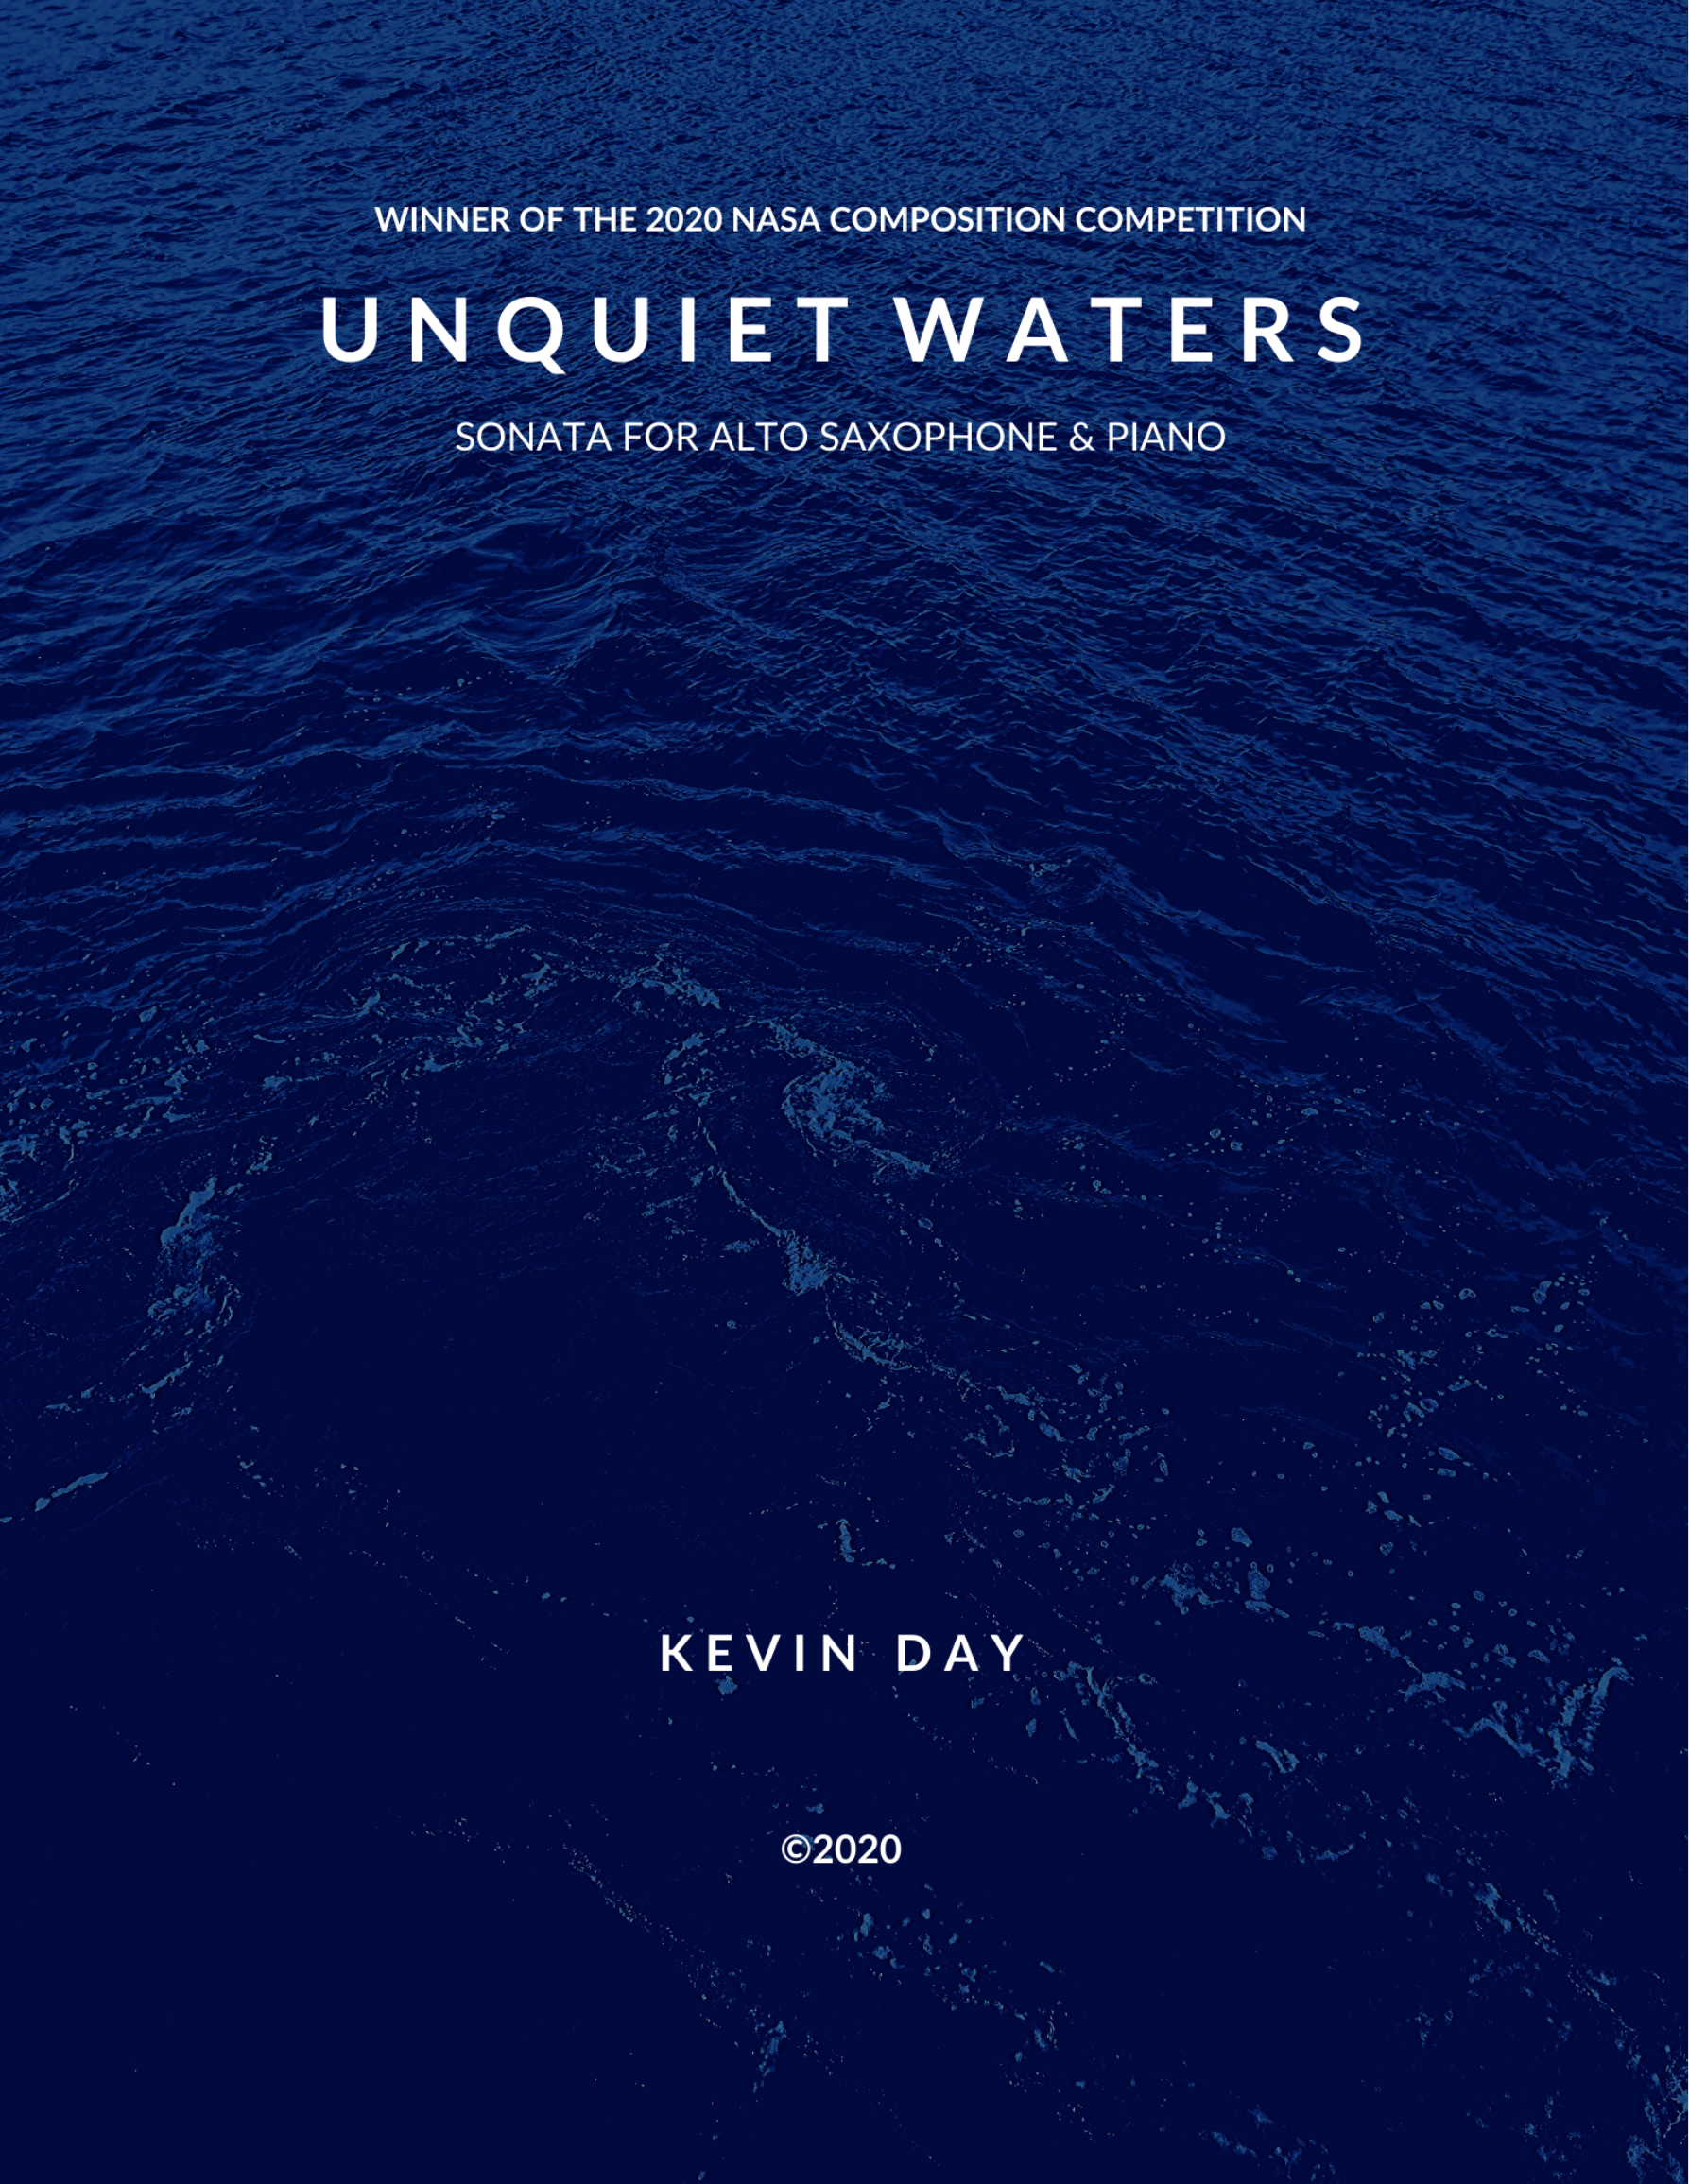 Unquiet Waters by Kevin Day